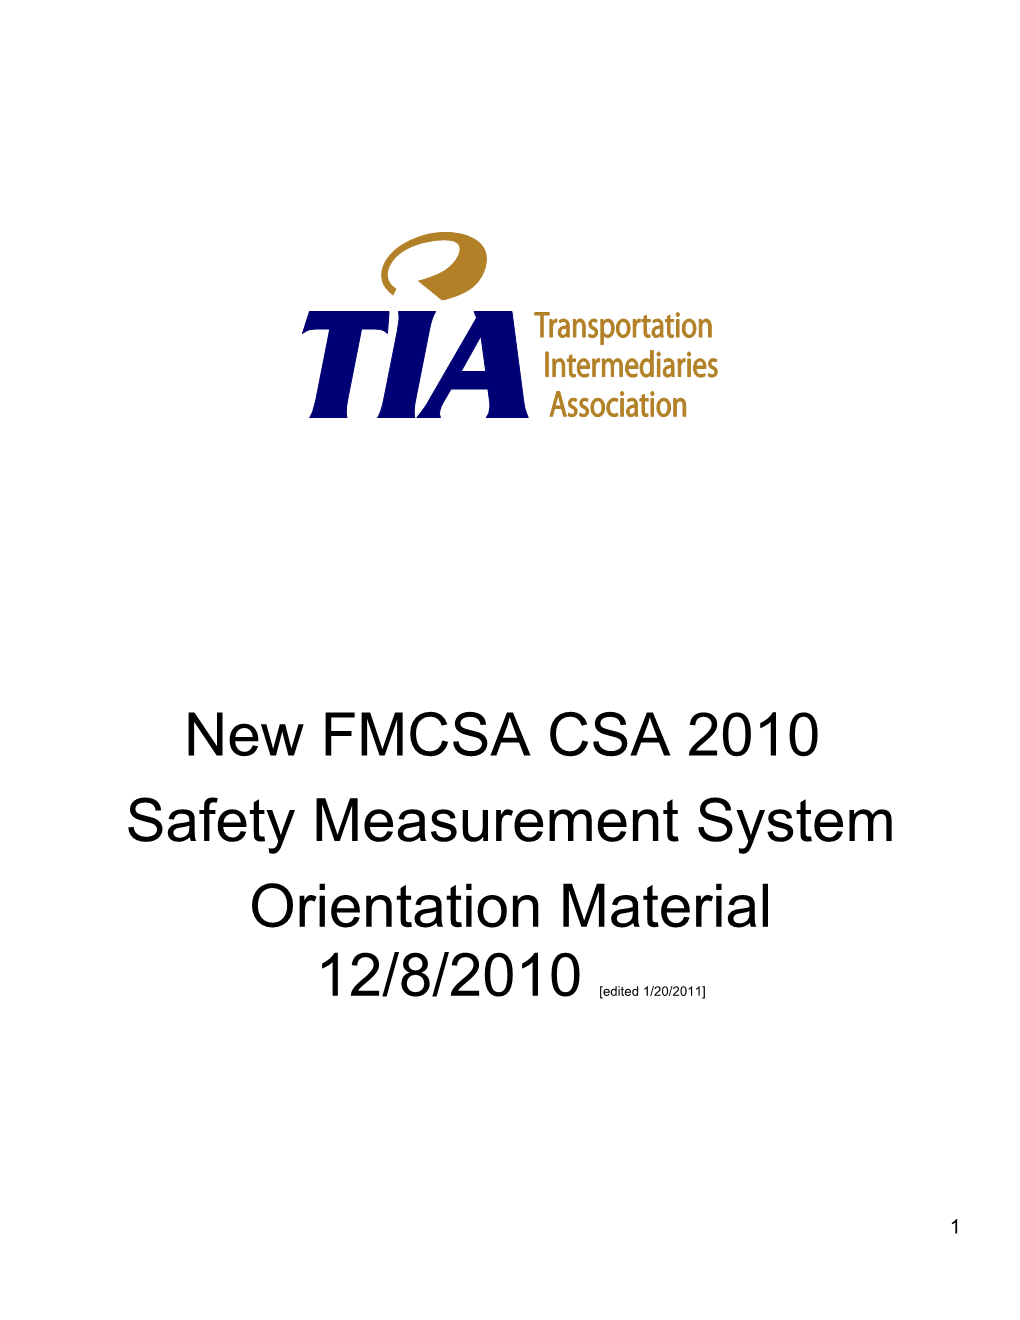 New FMCSA CSA 2010 Safety Measurement System